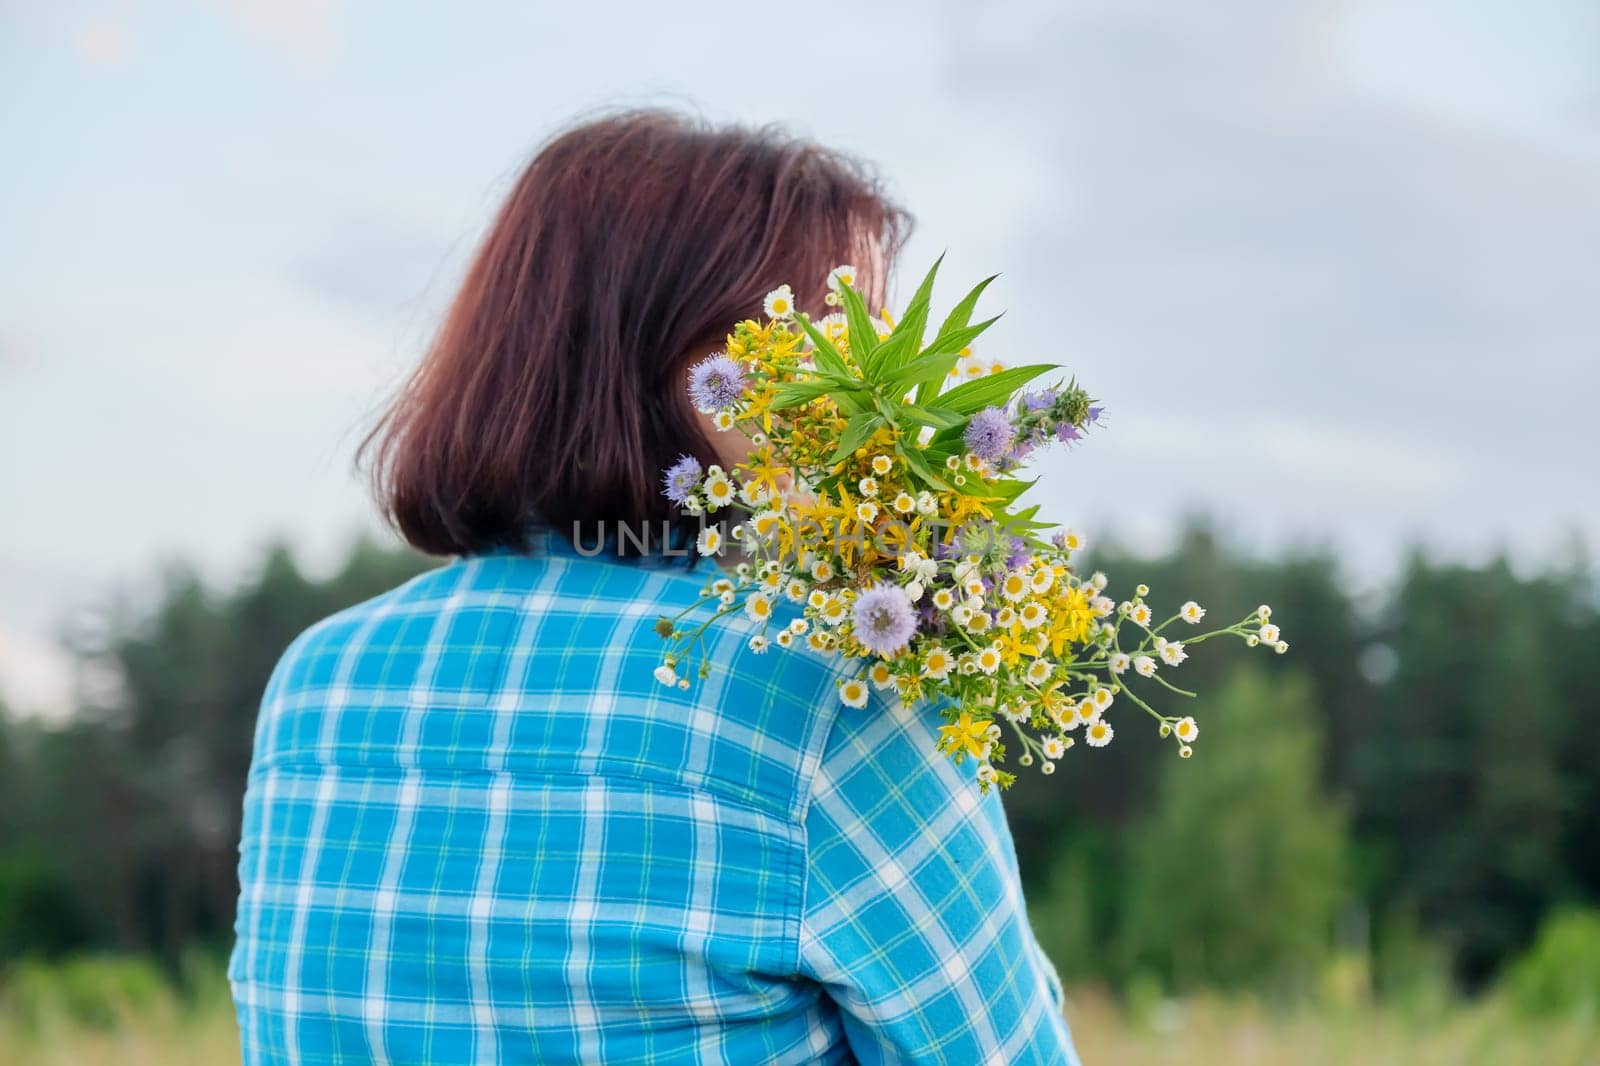 Summer nature, wild meadow, back view of a woman with bouquets of wildflowers. Summertime, beauty, naturalness, walks and hikes, people concept